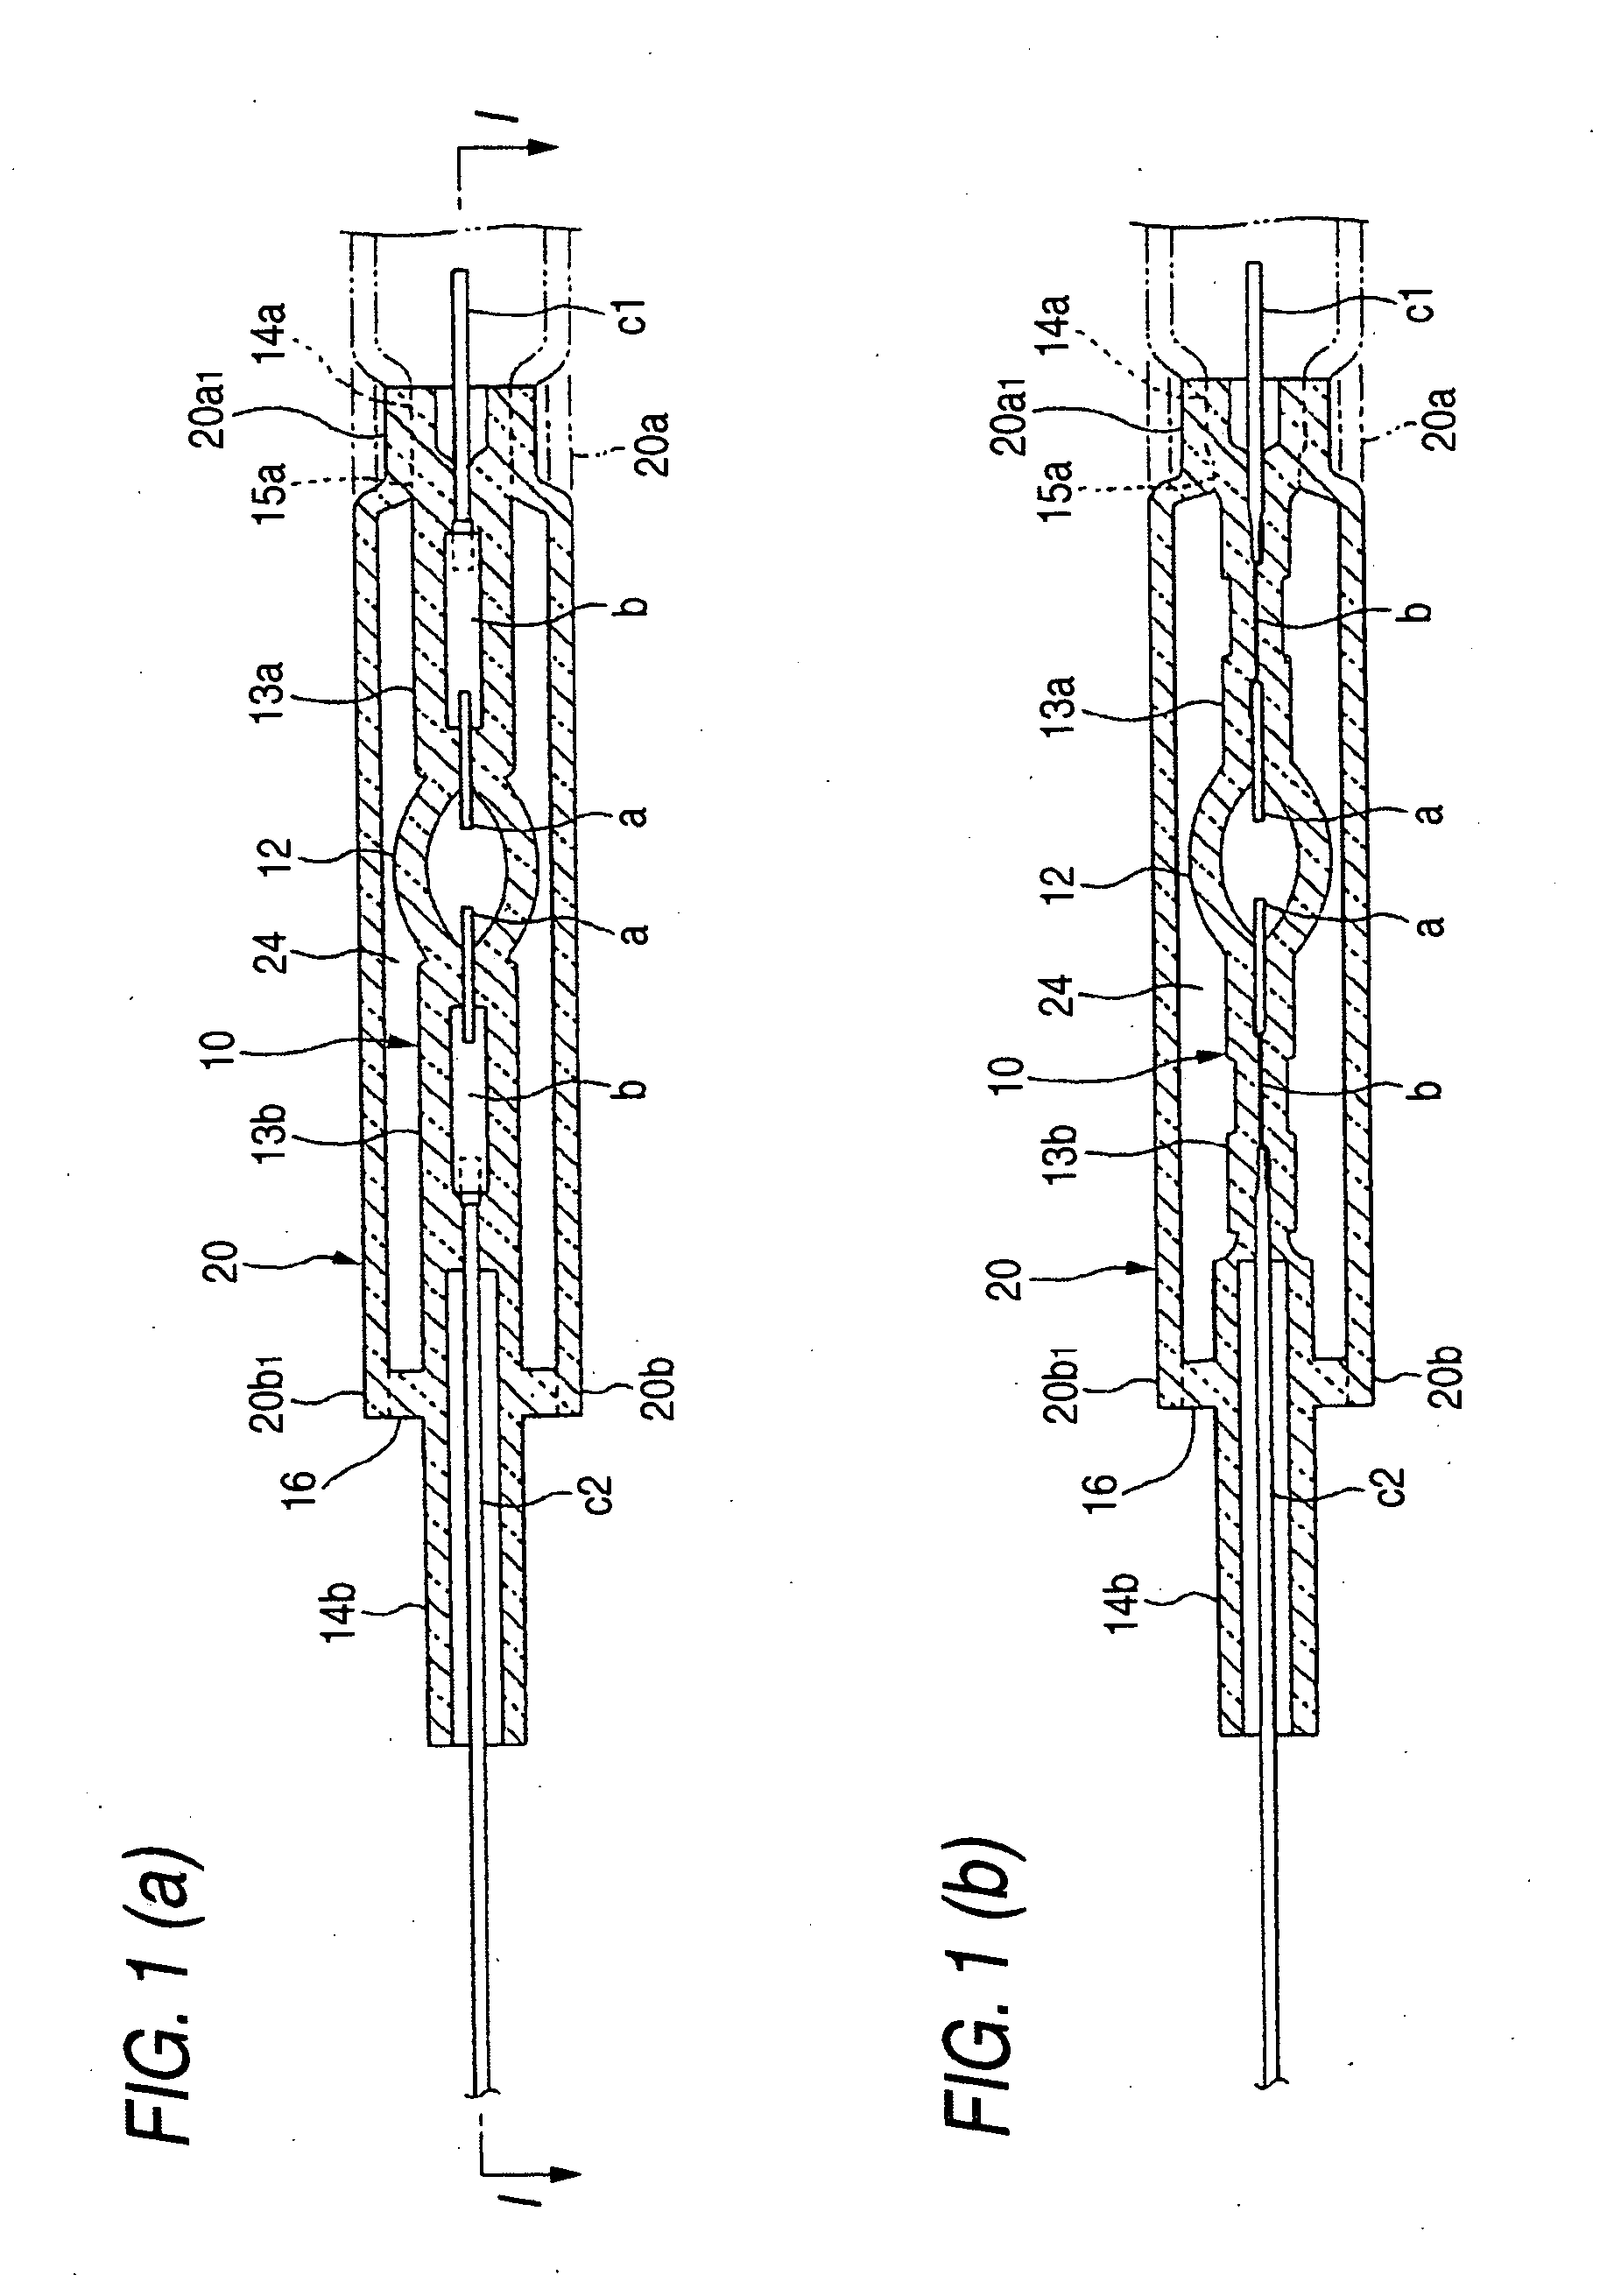 Method and apparatus for welding shroud glass tube in arc tube for discharge lamp